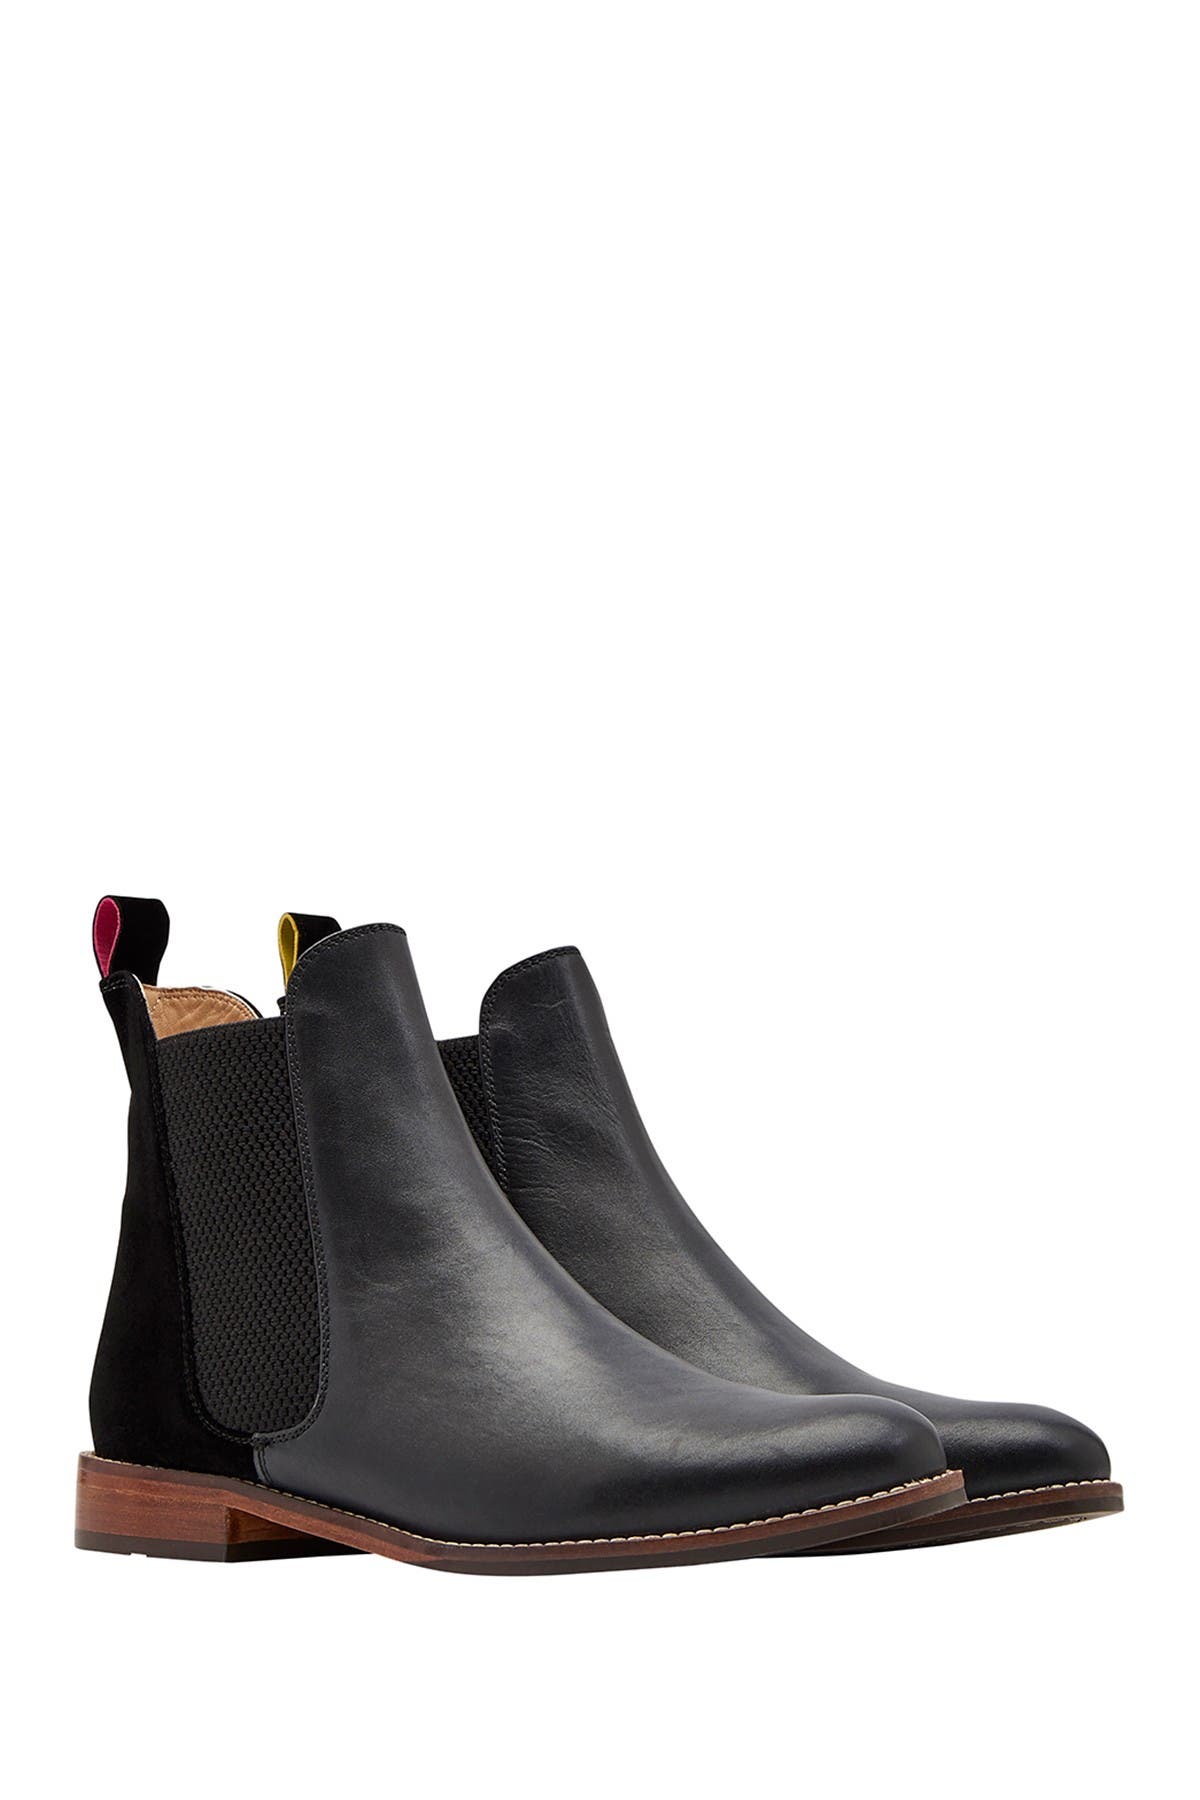 westbourne boots